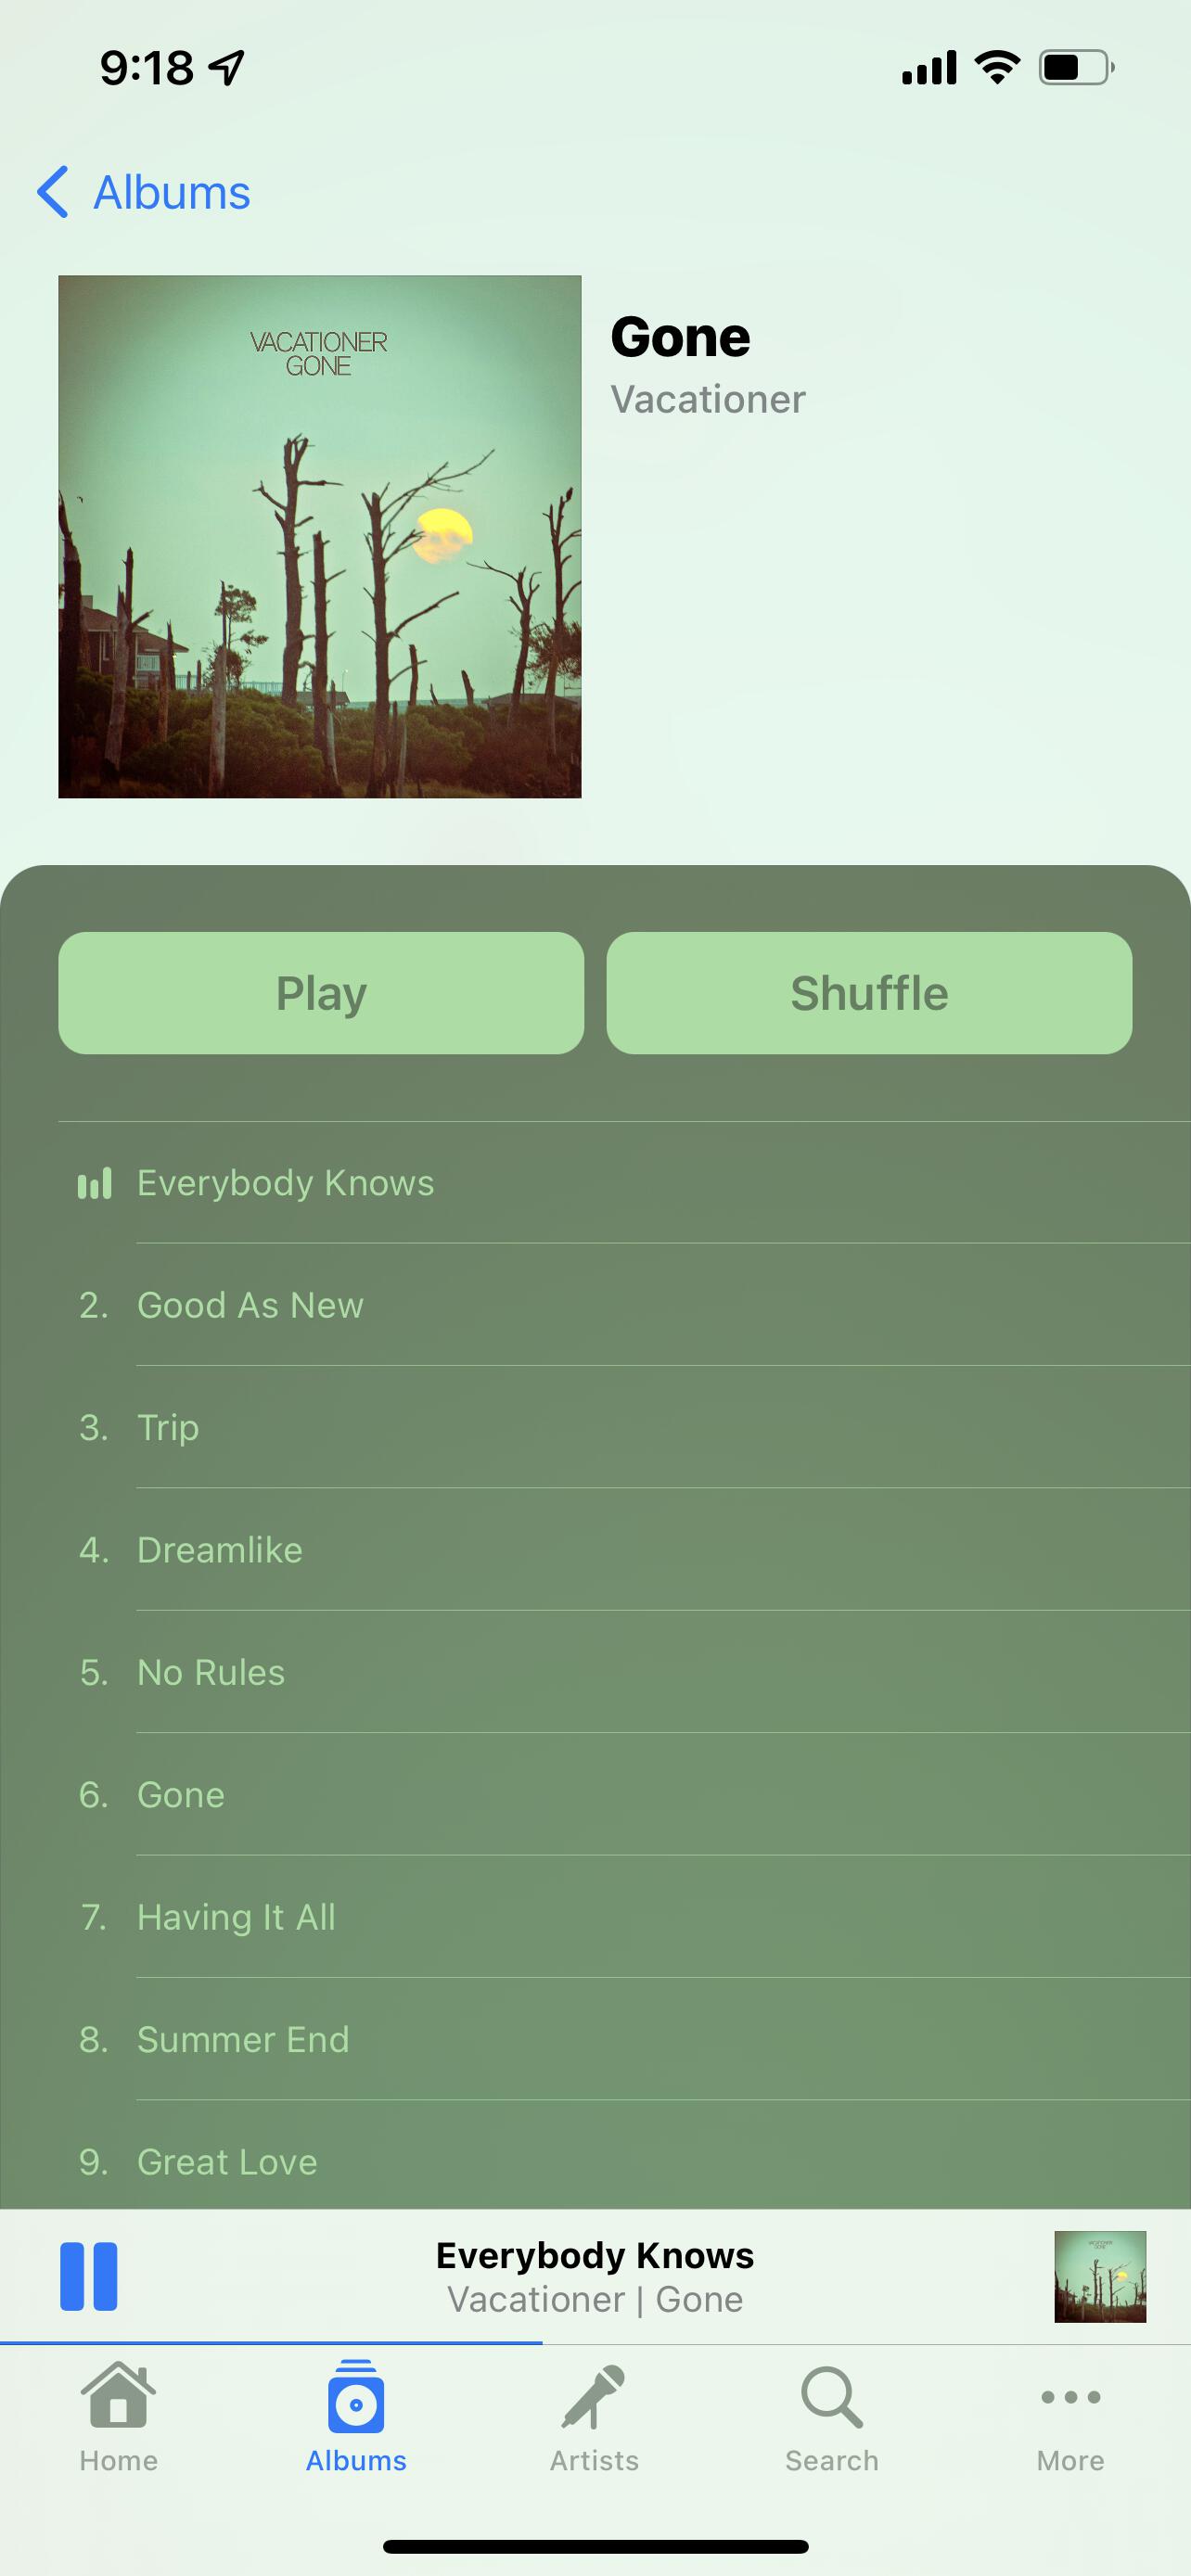 Image of the album view in light mode with a predominantly green record